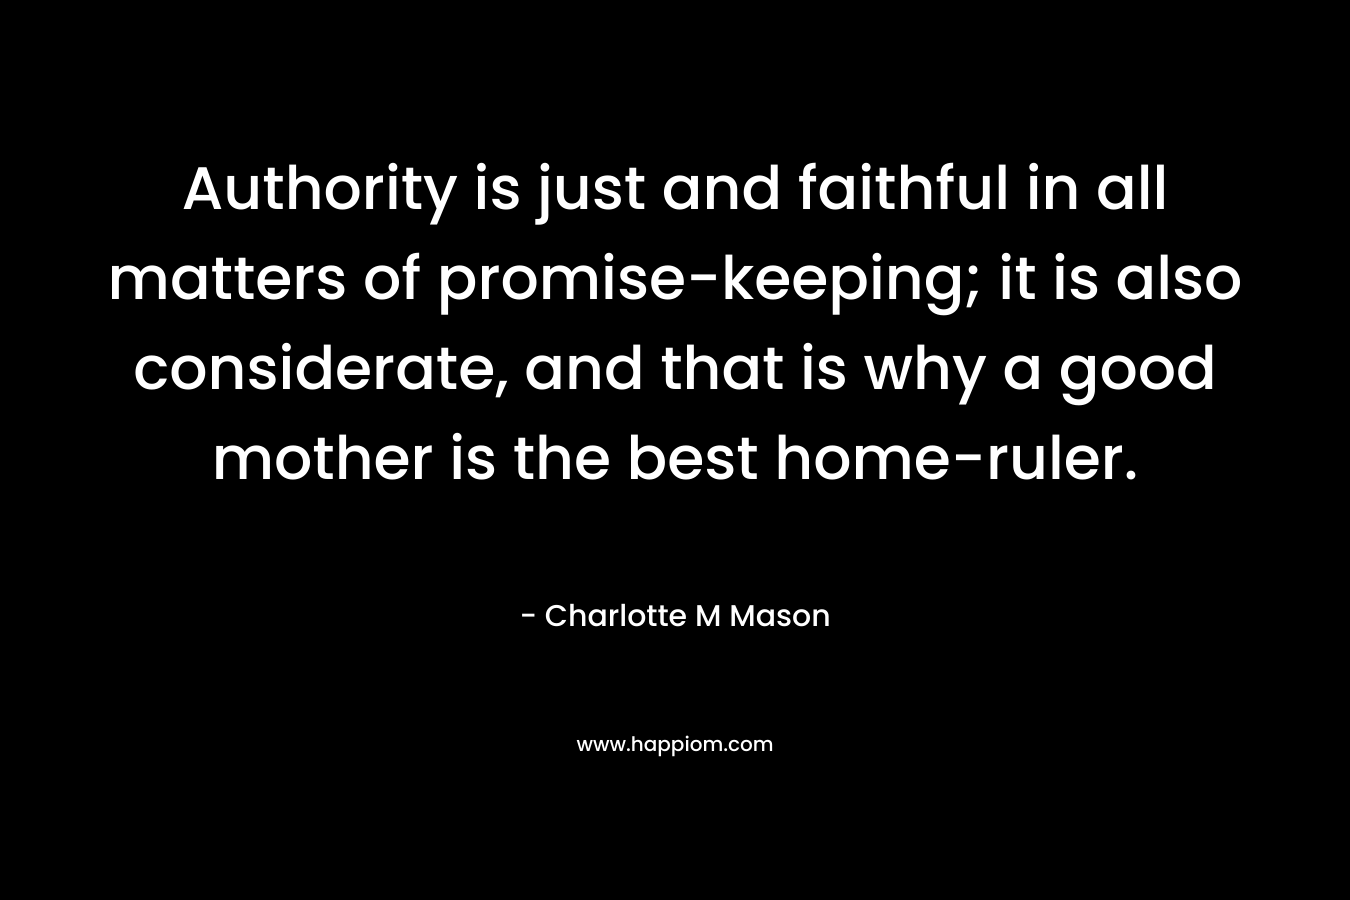 Authority is just and faithful in all matters of promise-keeping; it is also considerate, and that is why a good mother is the best home-ruler. – Charlotte M Mason